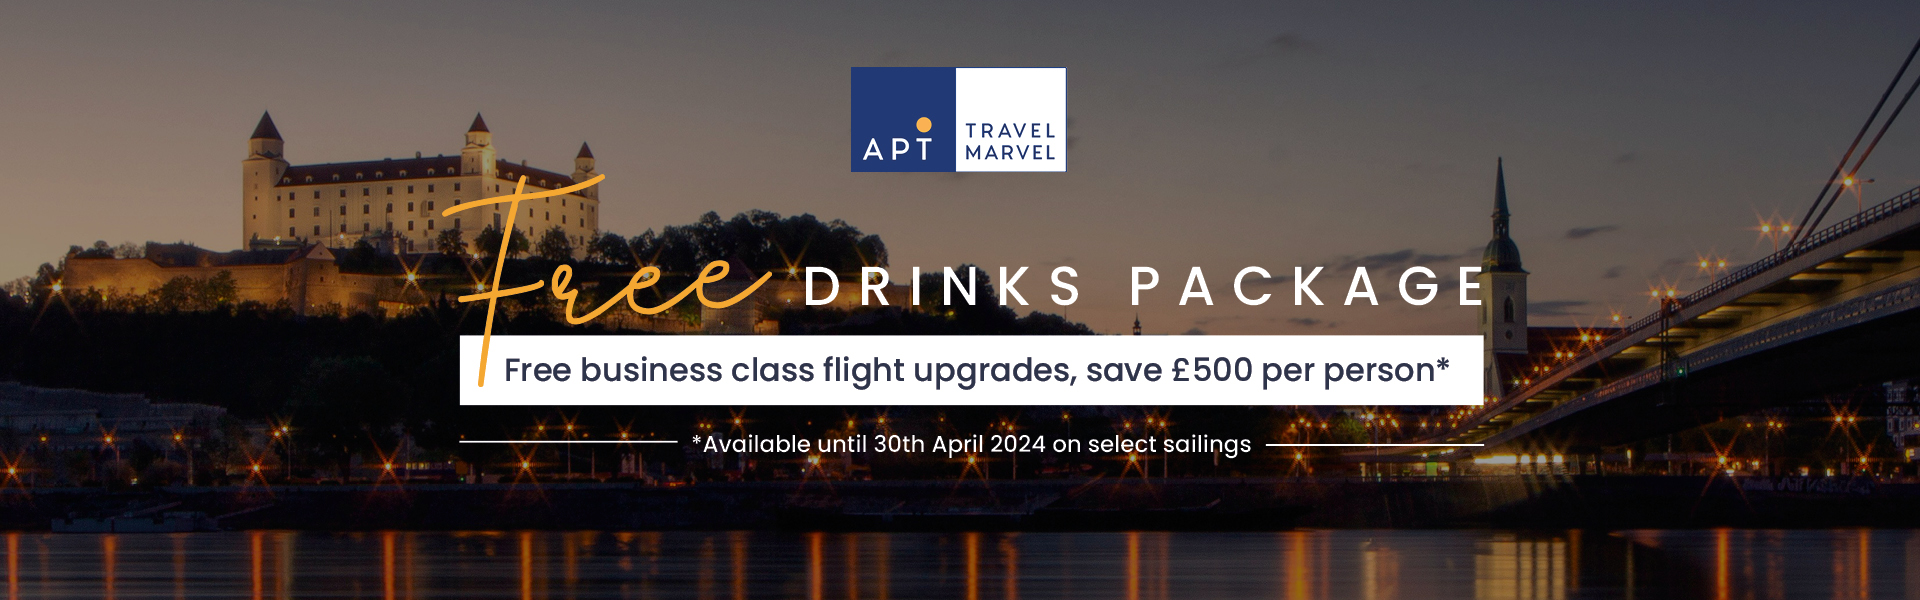 APT Travelmarvel - Free Drinks Package - Free Business Class Upgrade - Save £500pp